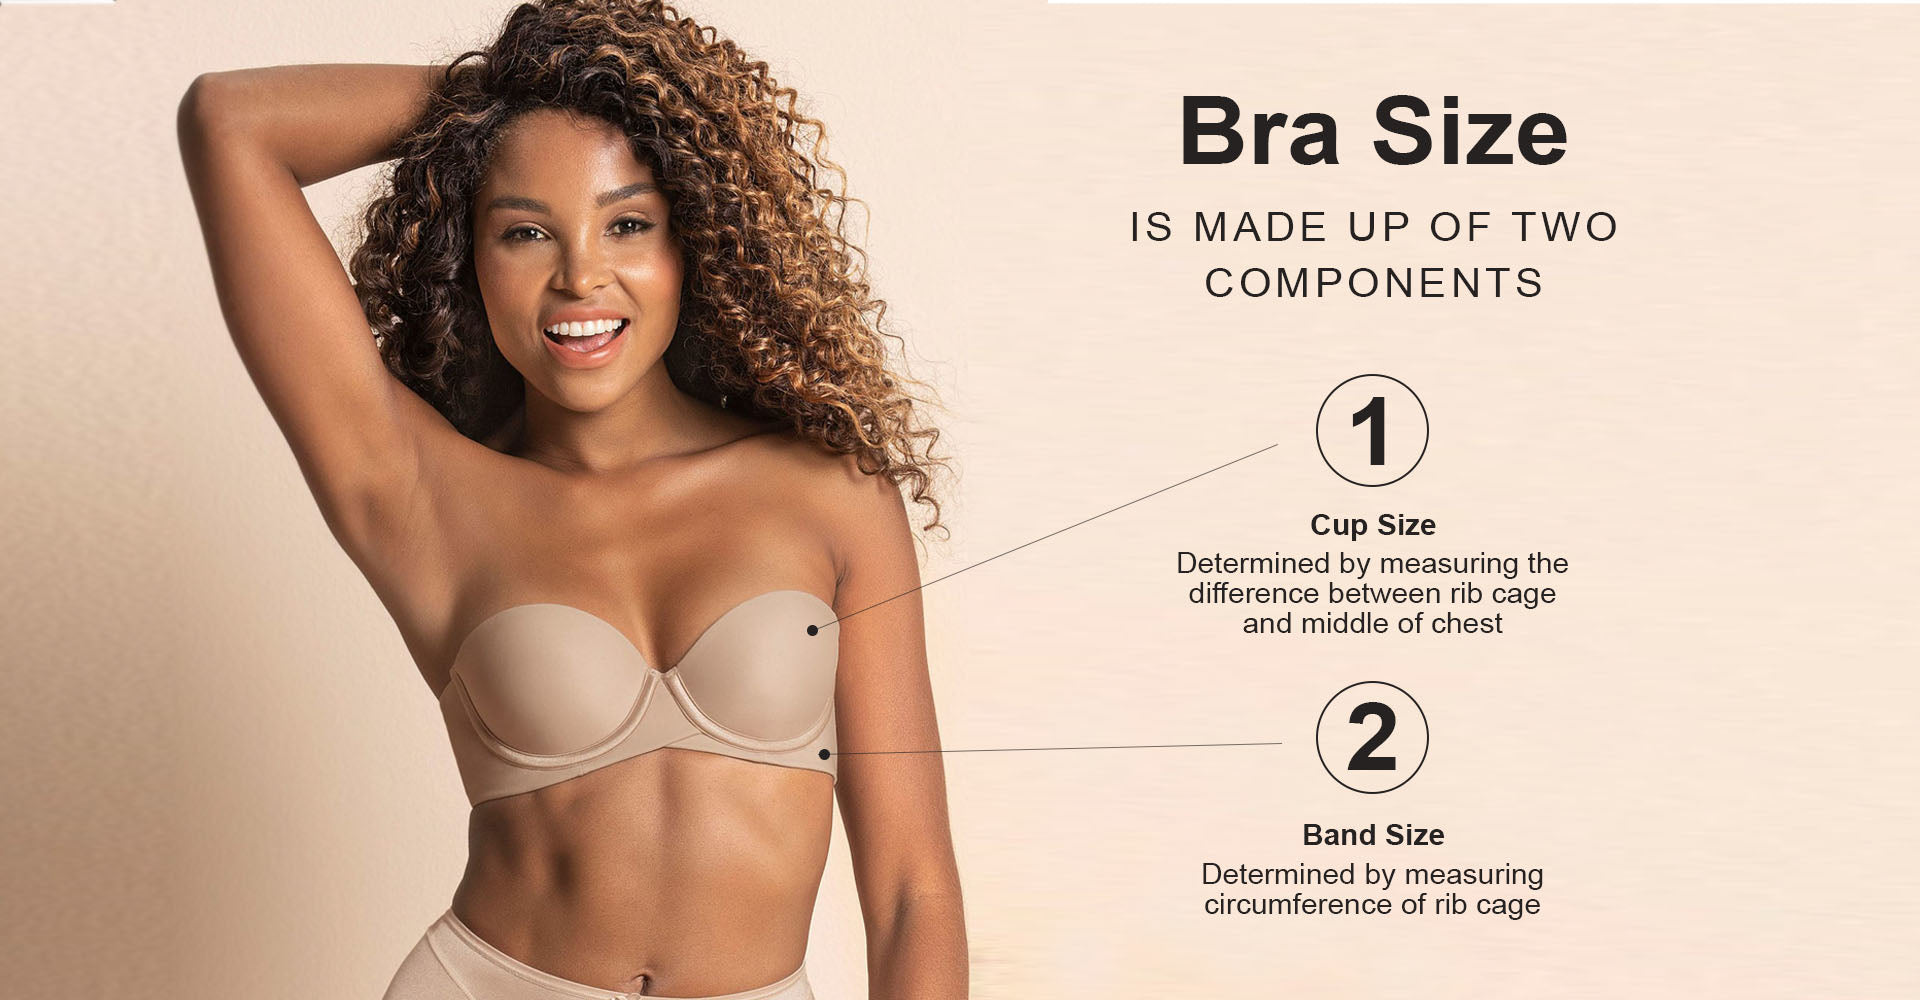 What is the smallest cup size in bras? - Quora